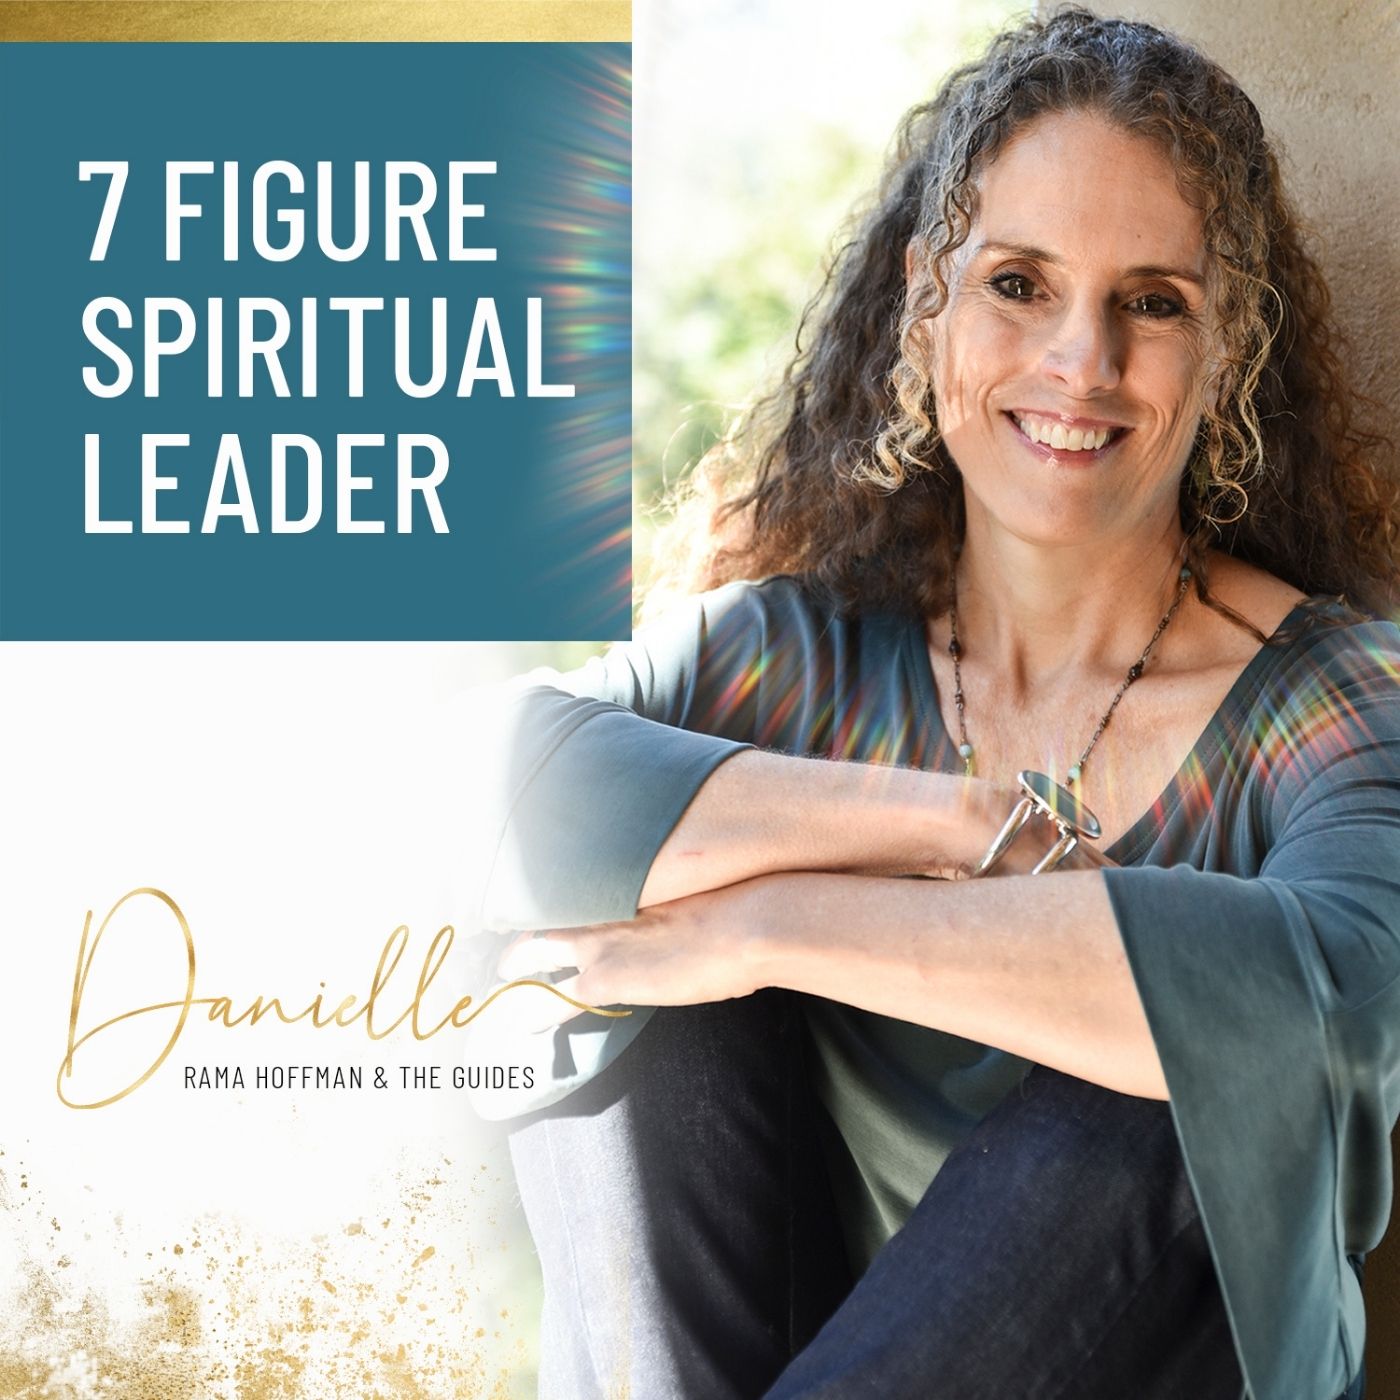 Healing Your Mind, Body and Spirit To Reach Your Highest Potential with Jennifer Takagi